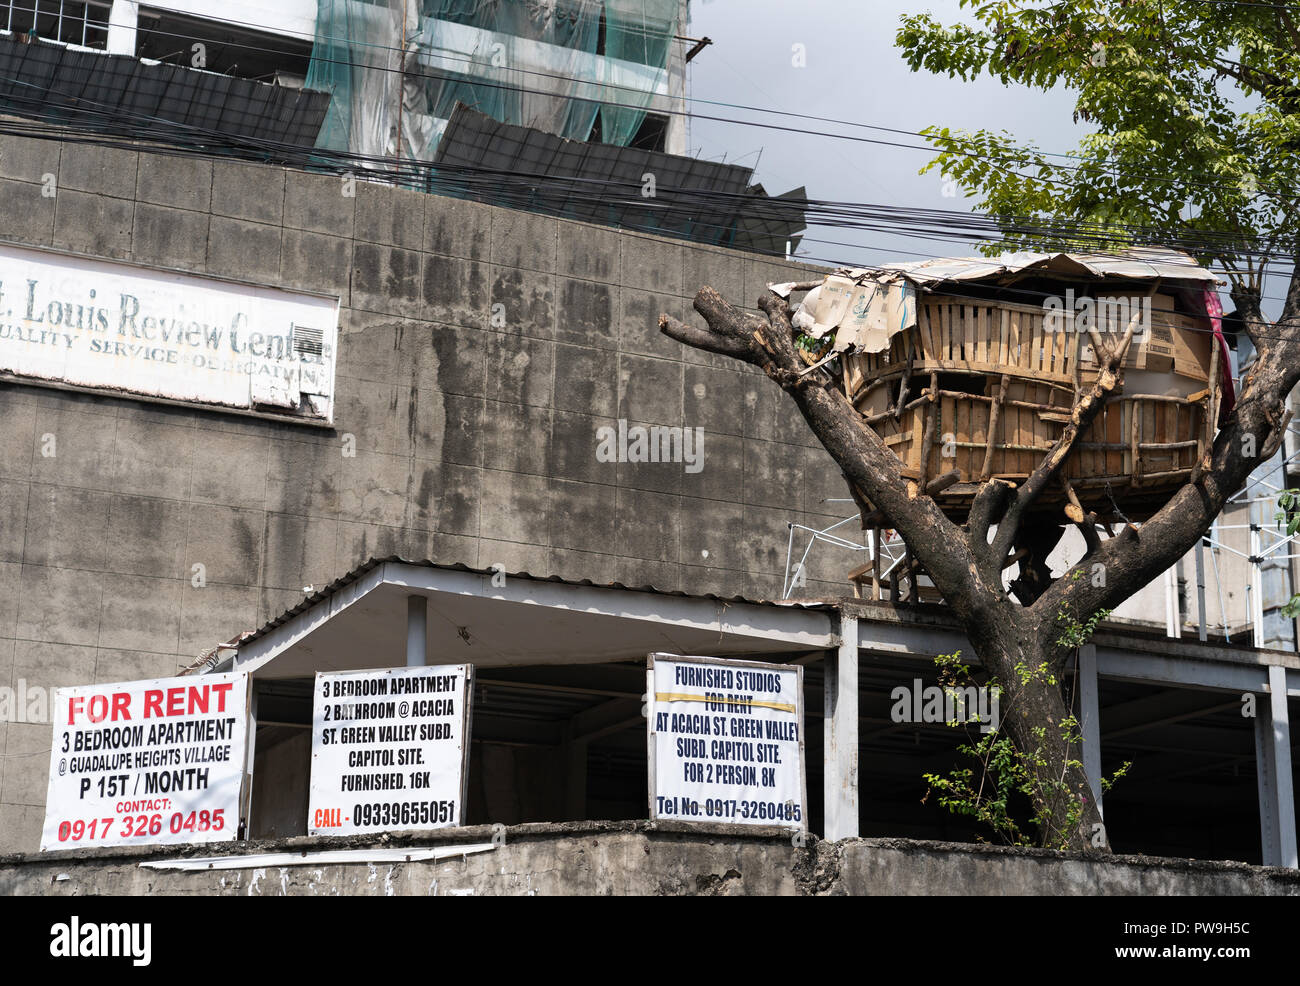 Juxtaposition image with a sign on a hoarding and a tree house alongside. Stock Photo